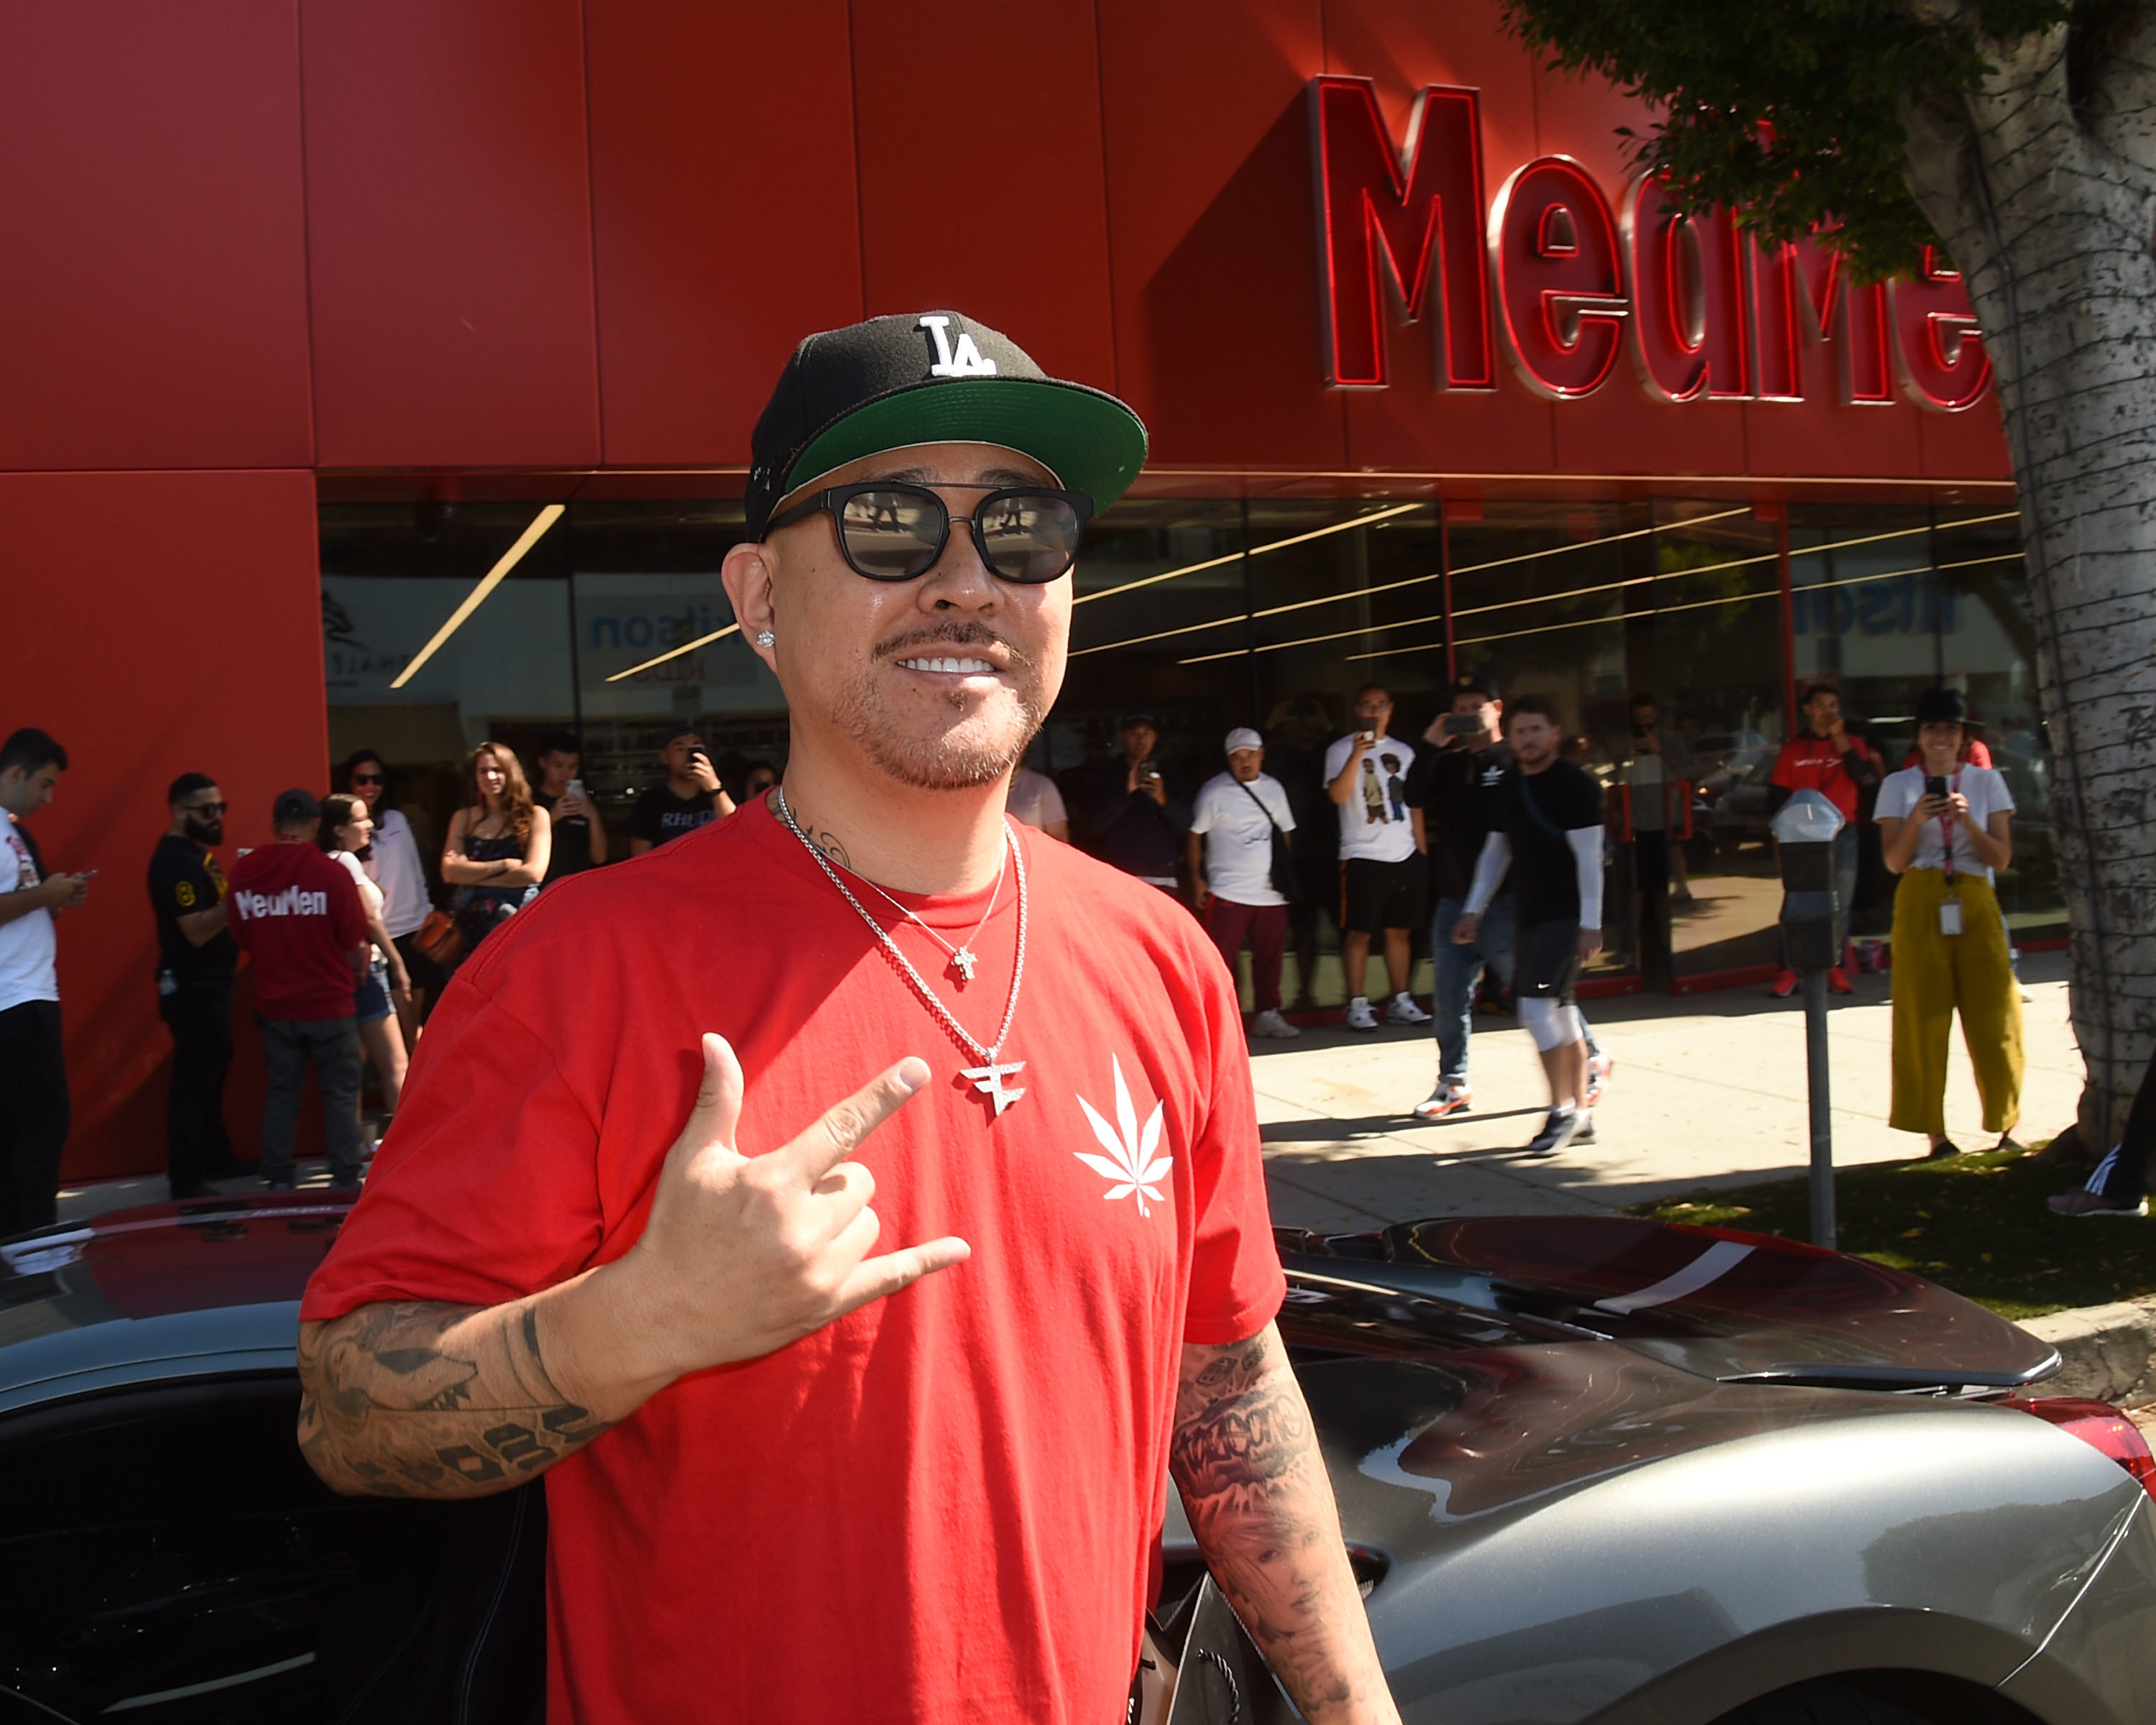 A guy giving the rock sign in front of MedMen dispensary